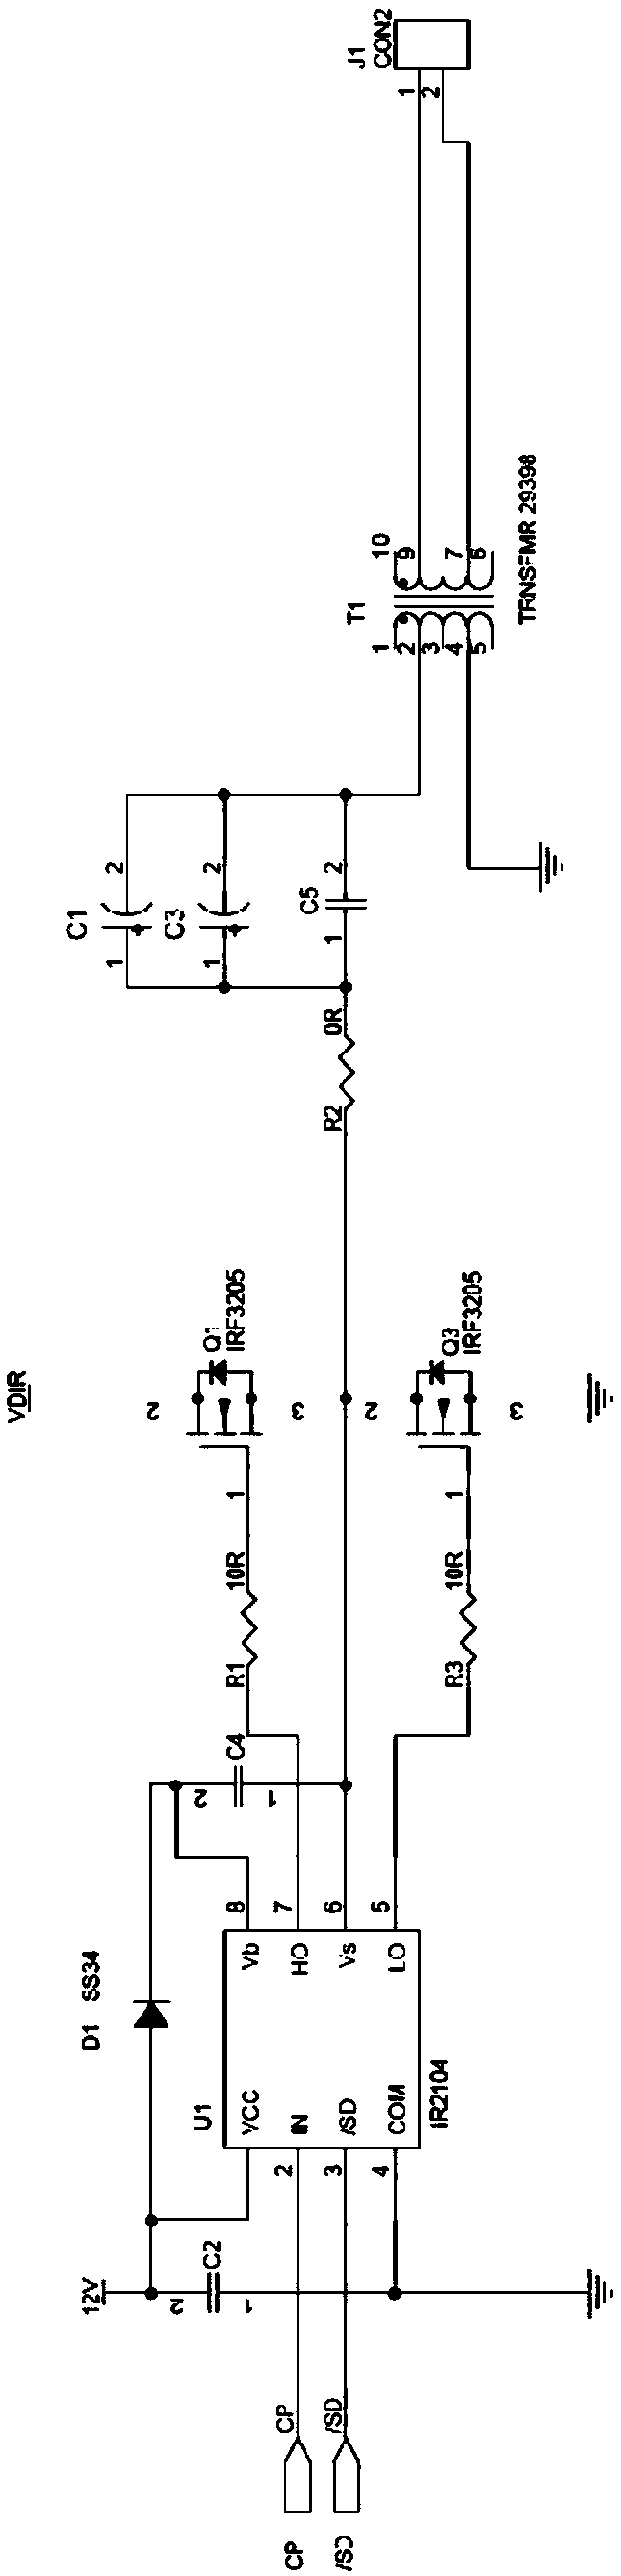 Cooling method of capacitance boundary alarm controller and signal amplification circuit